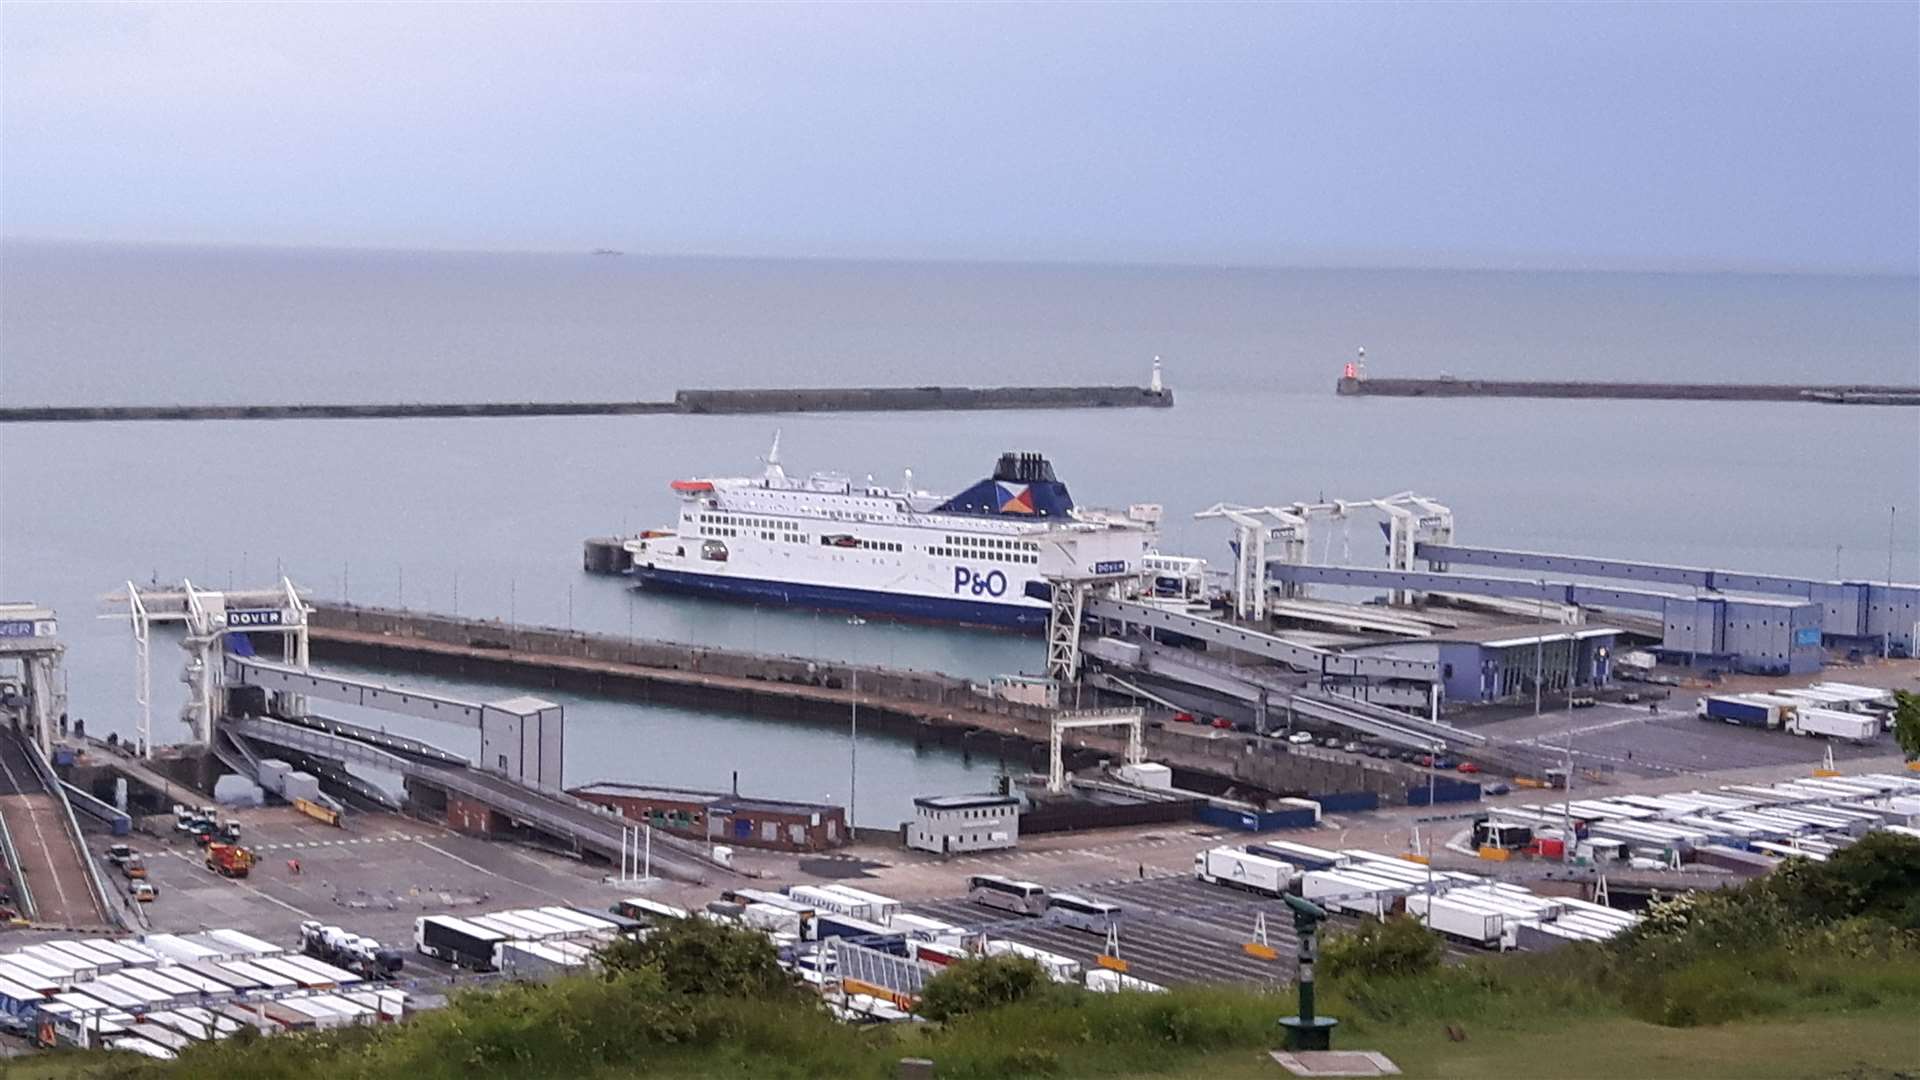 The van was stopped at the Port of Dover